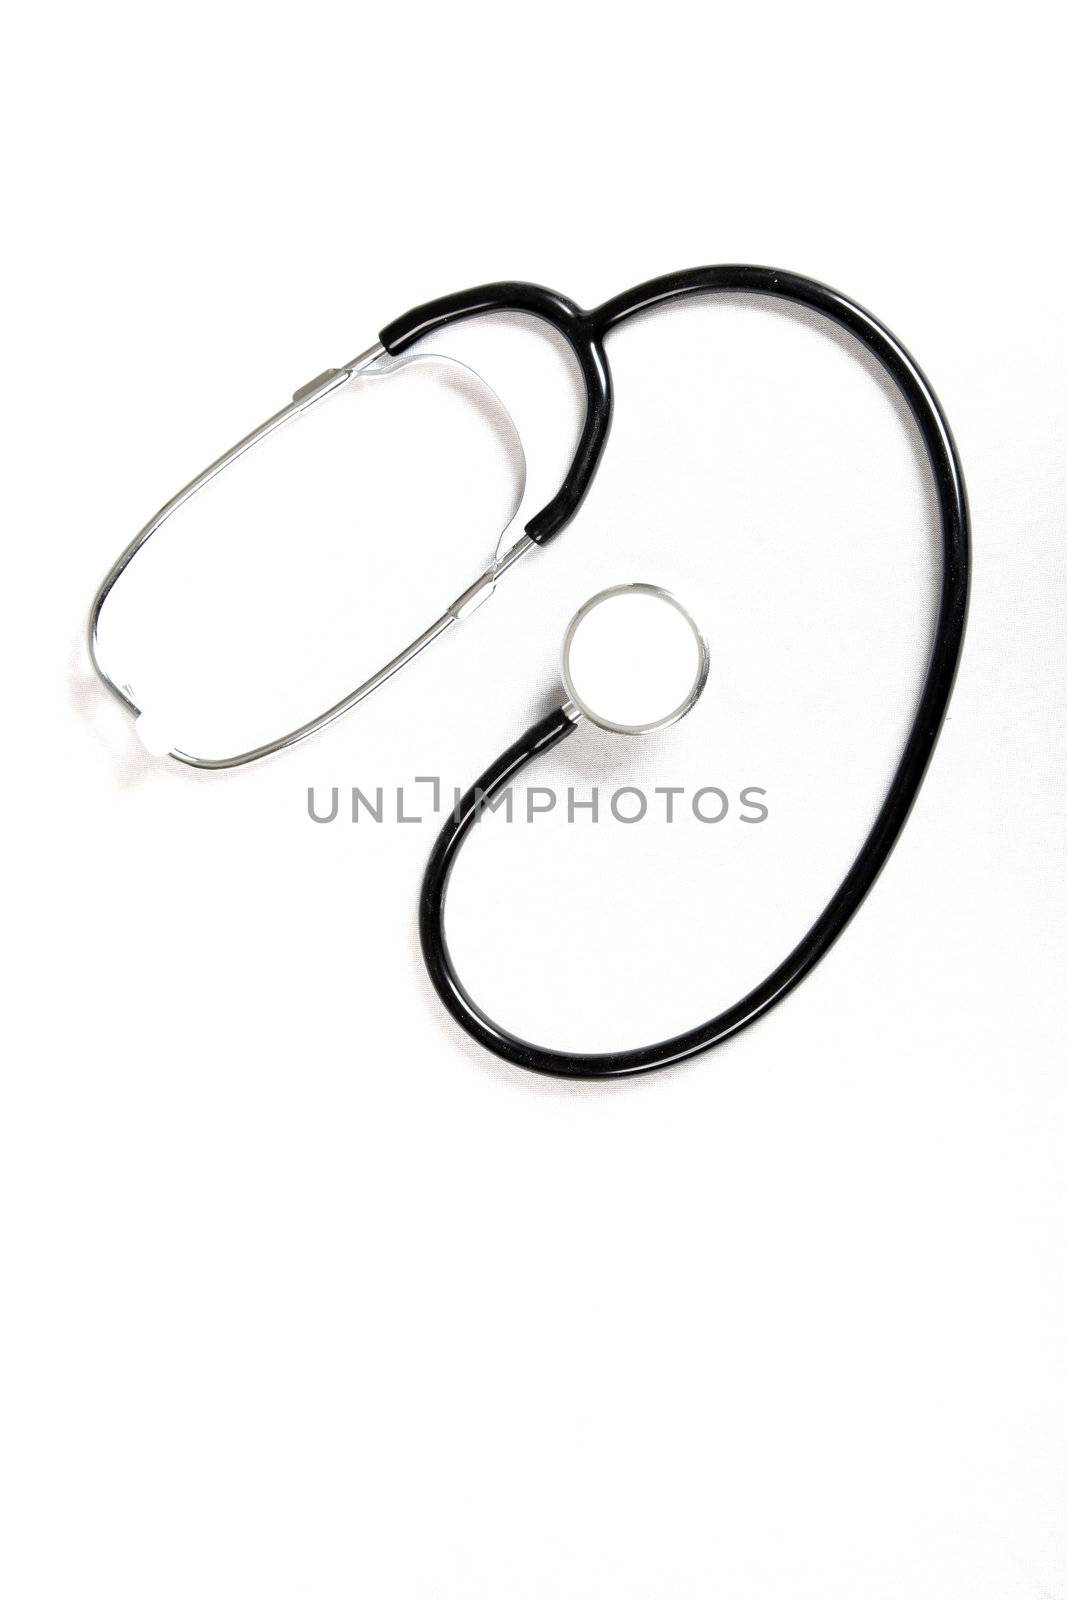 A stethoscope on white background
